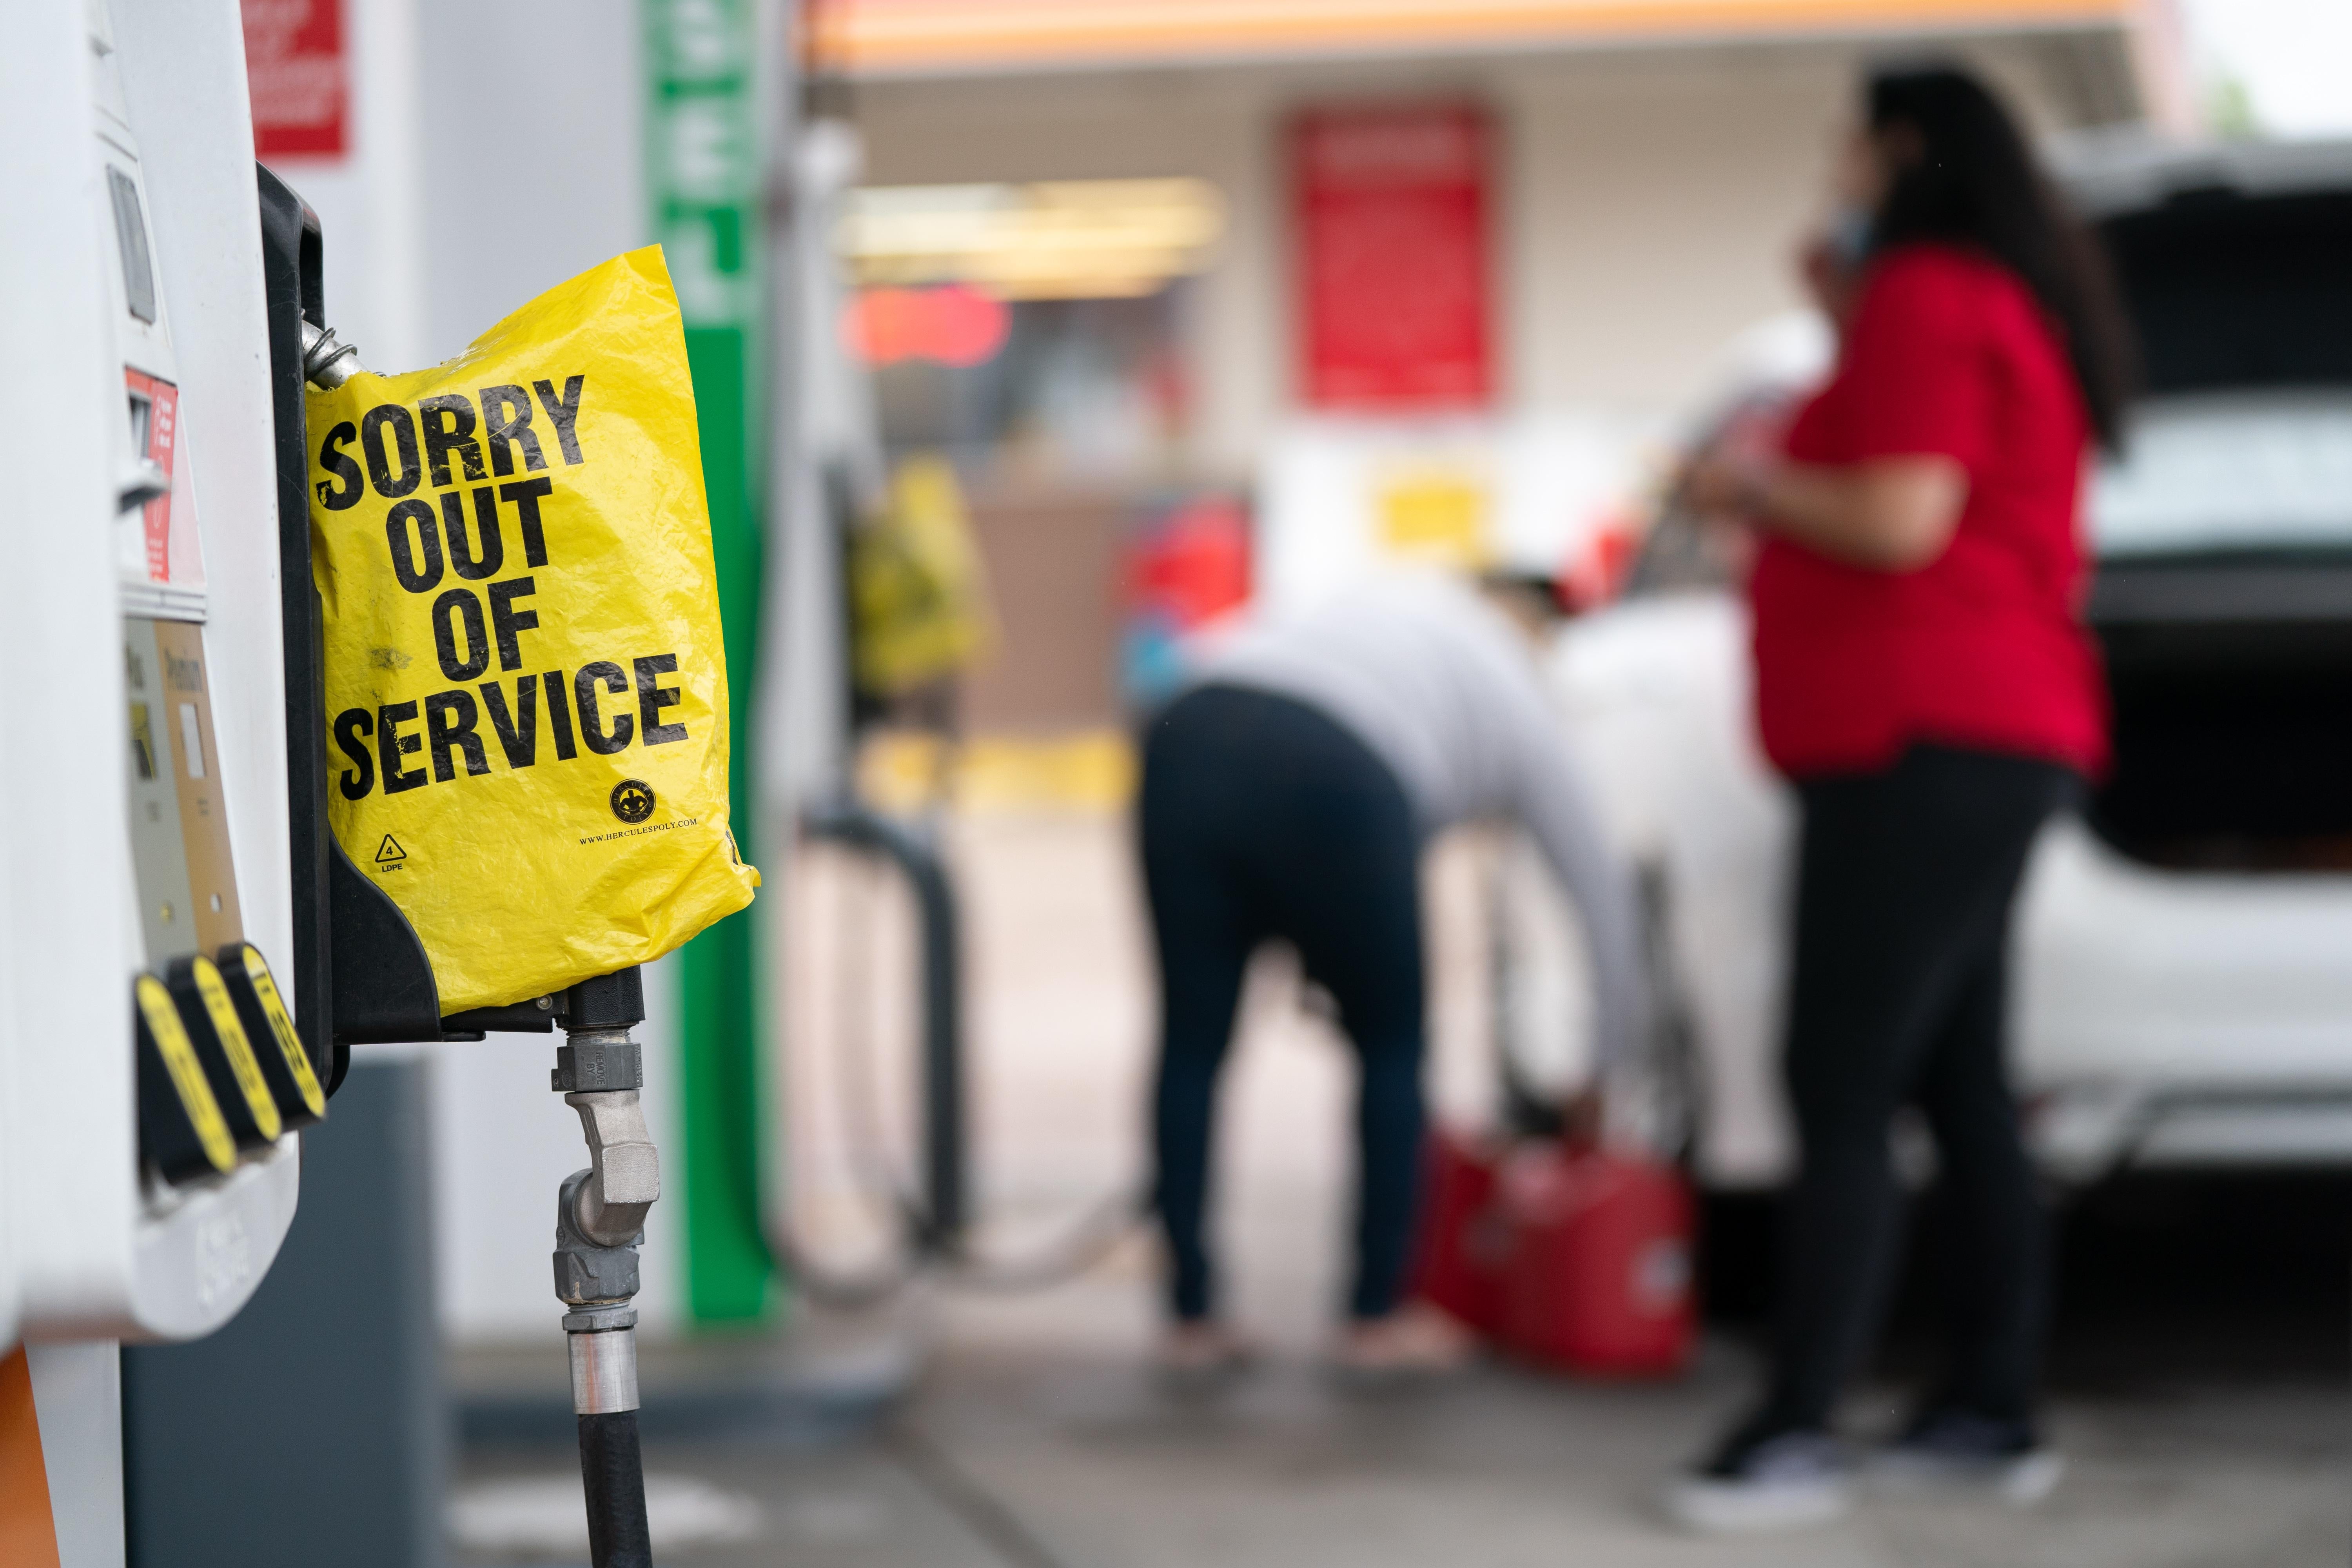 A yellow plastic "Sorry out of service" bag covers a gas pump handle.